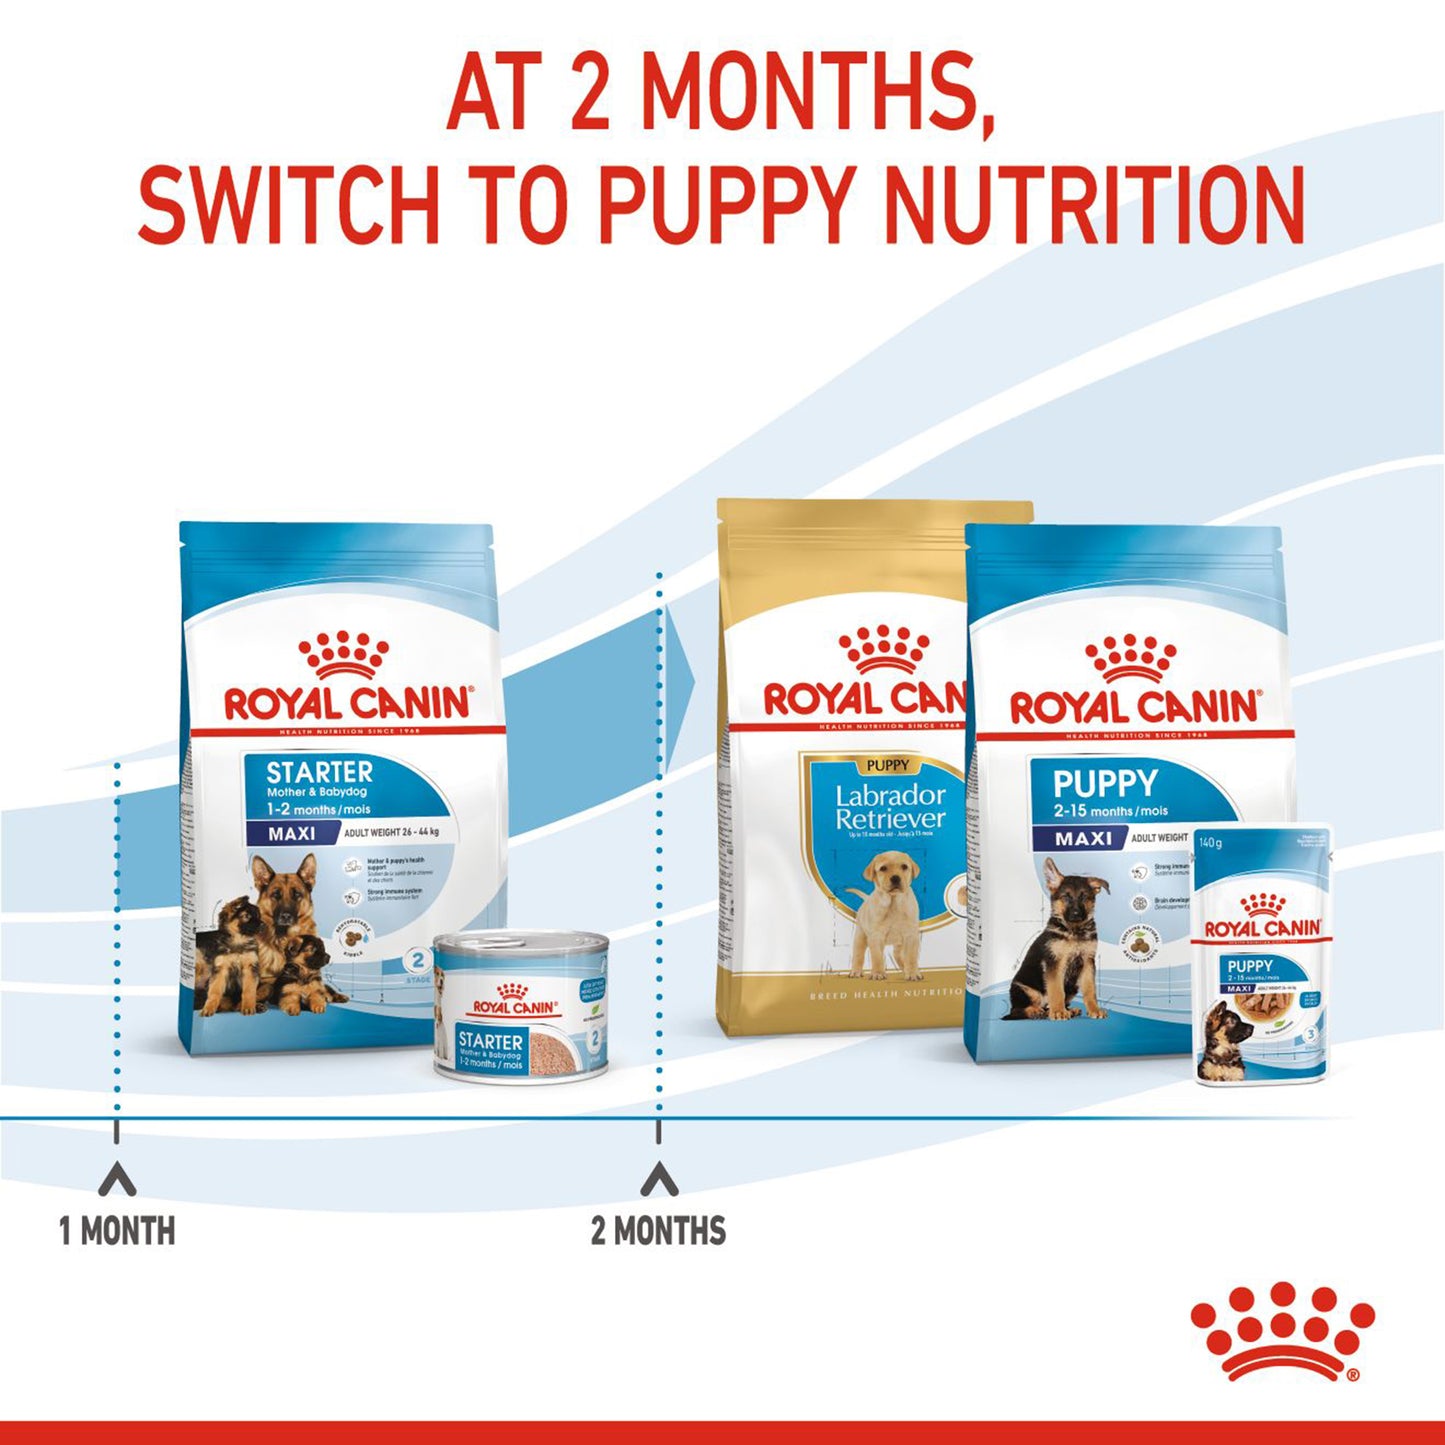 Royal Canin Maxi Starter Dry Dog Food - Heads Up For Tails